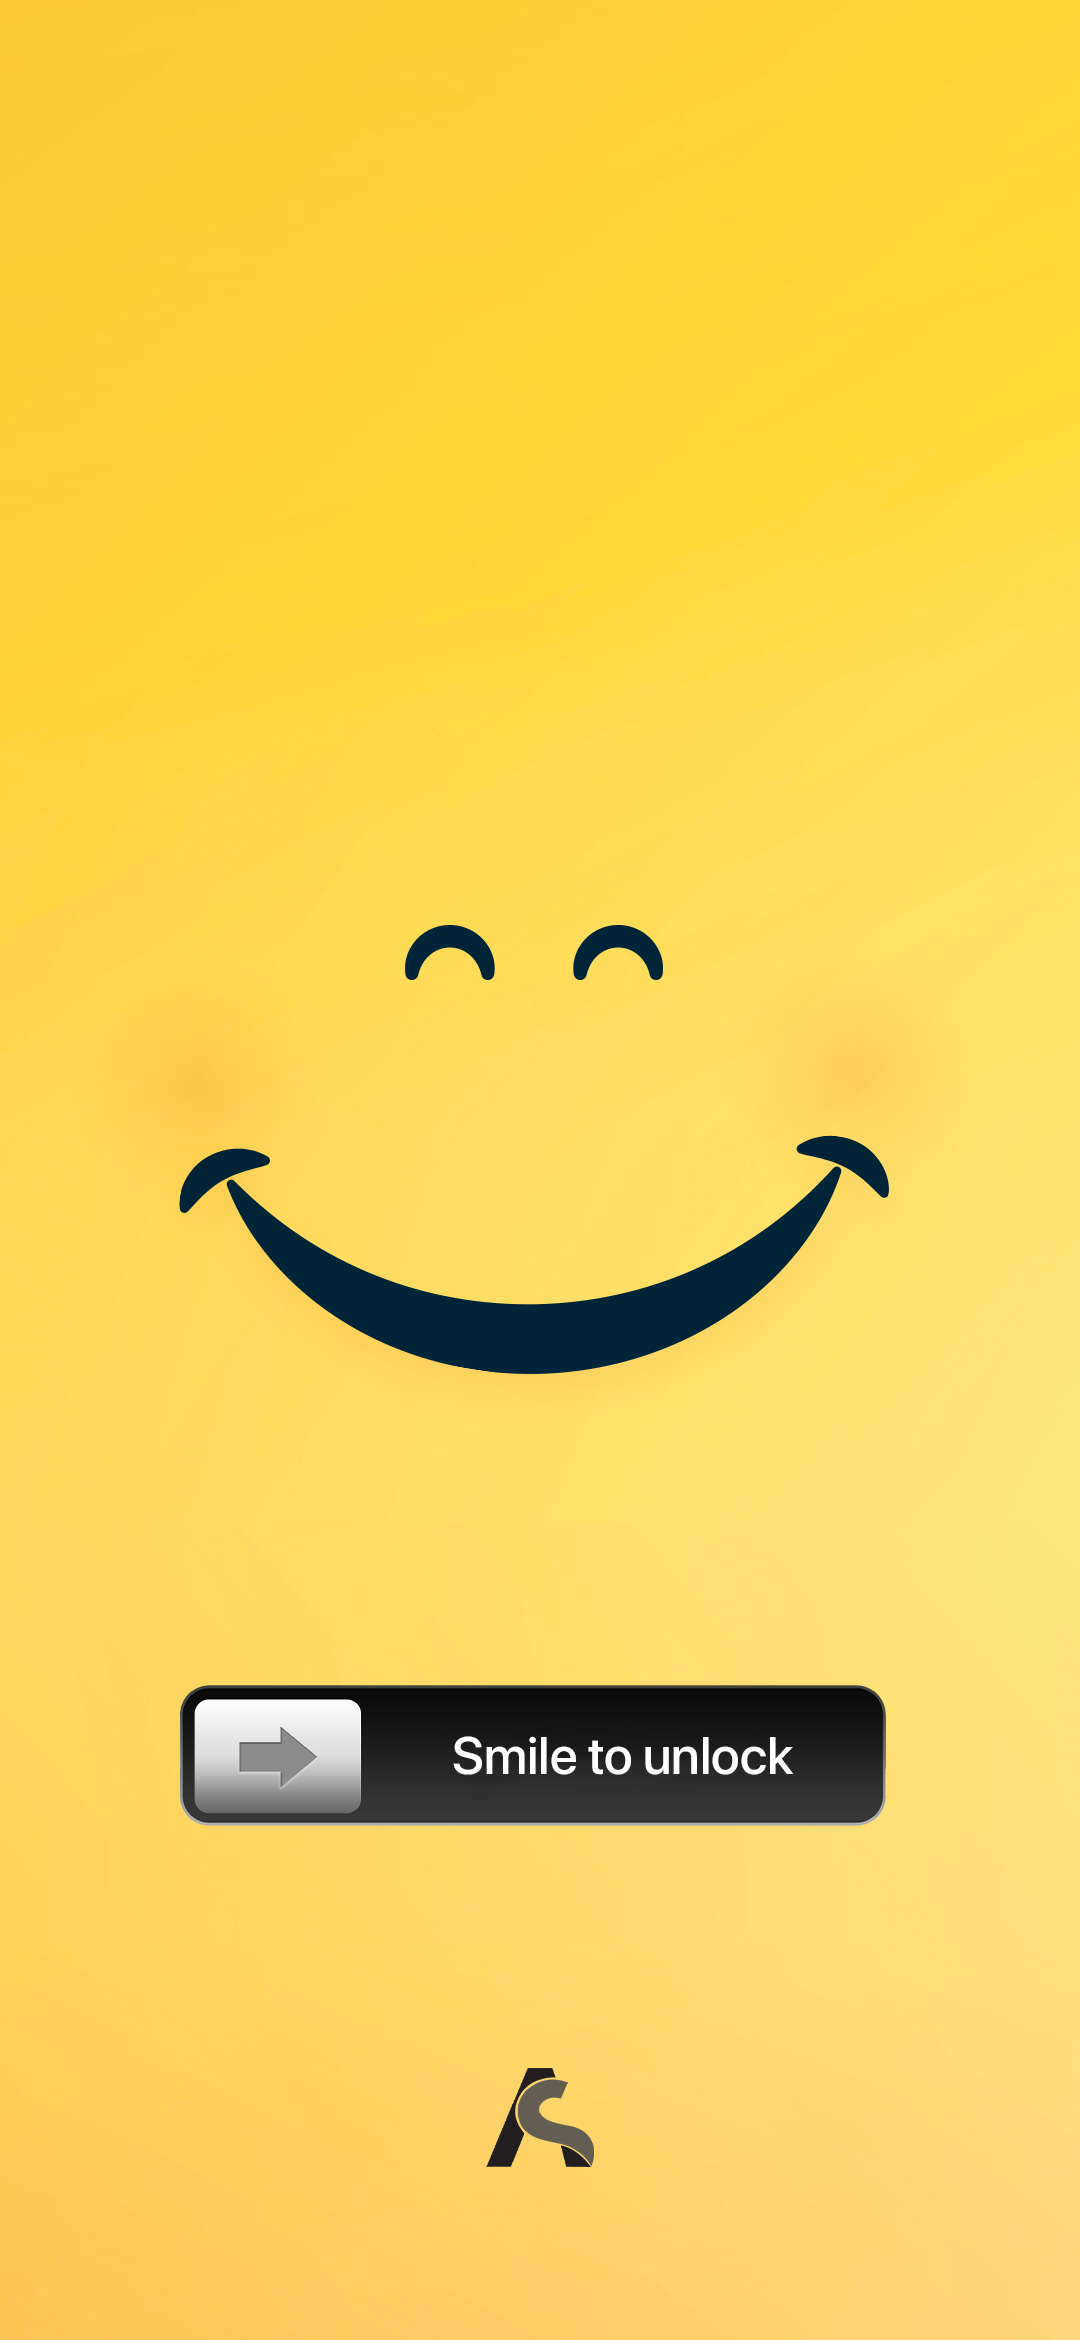 Smile to Unlock iPhone Wallpaper Free Download | Applesutra